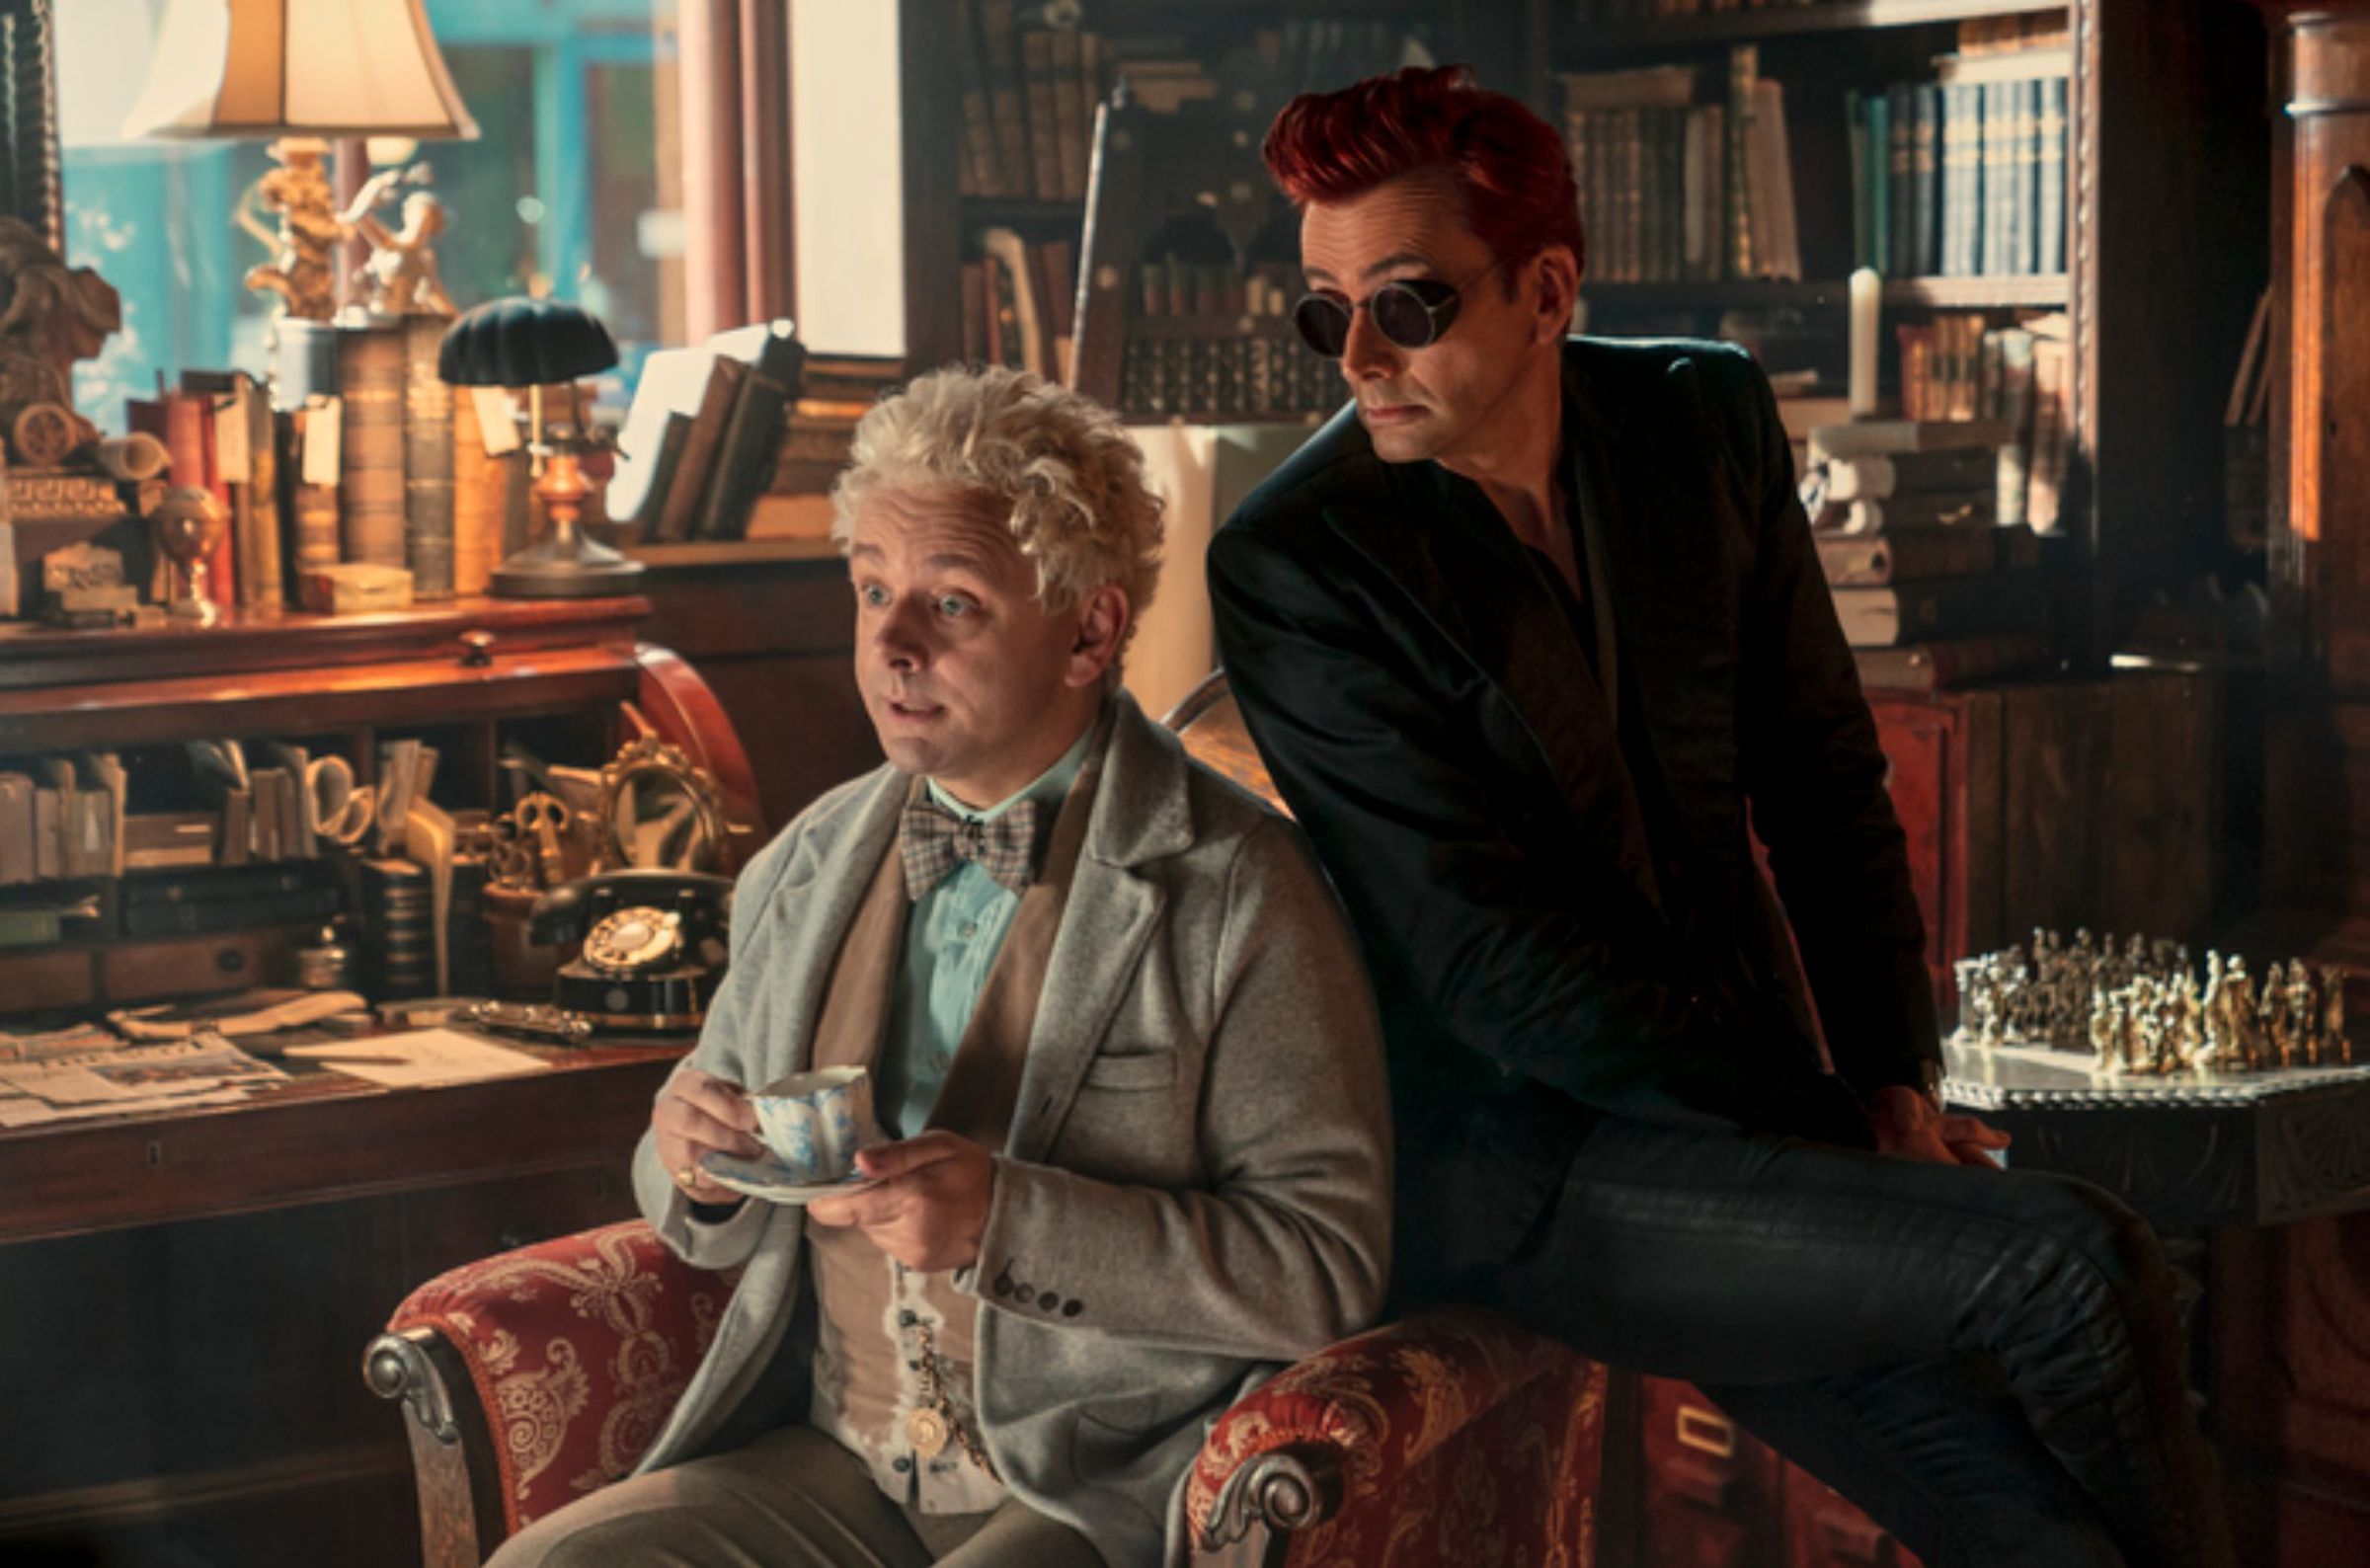 Crowley and Aziraphale from Good Omens season 2.